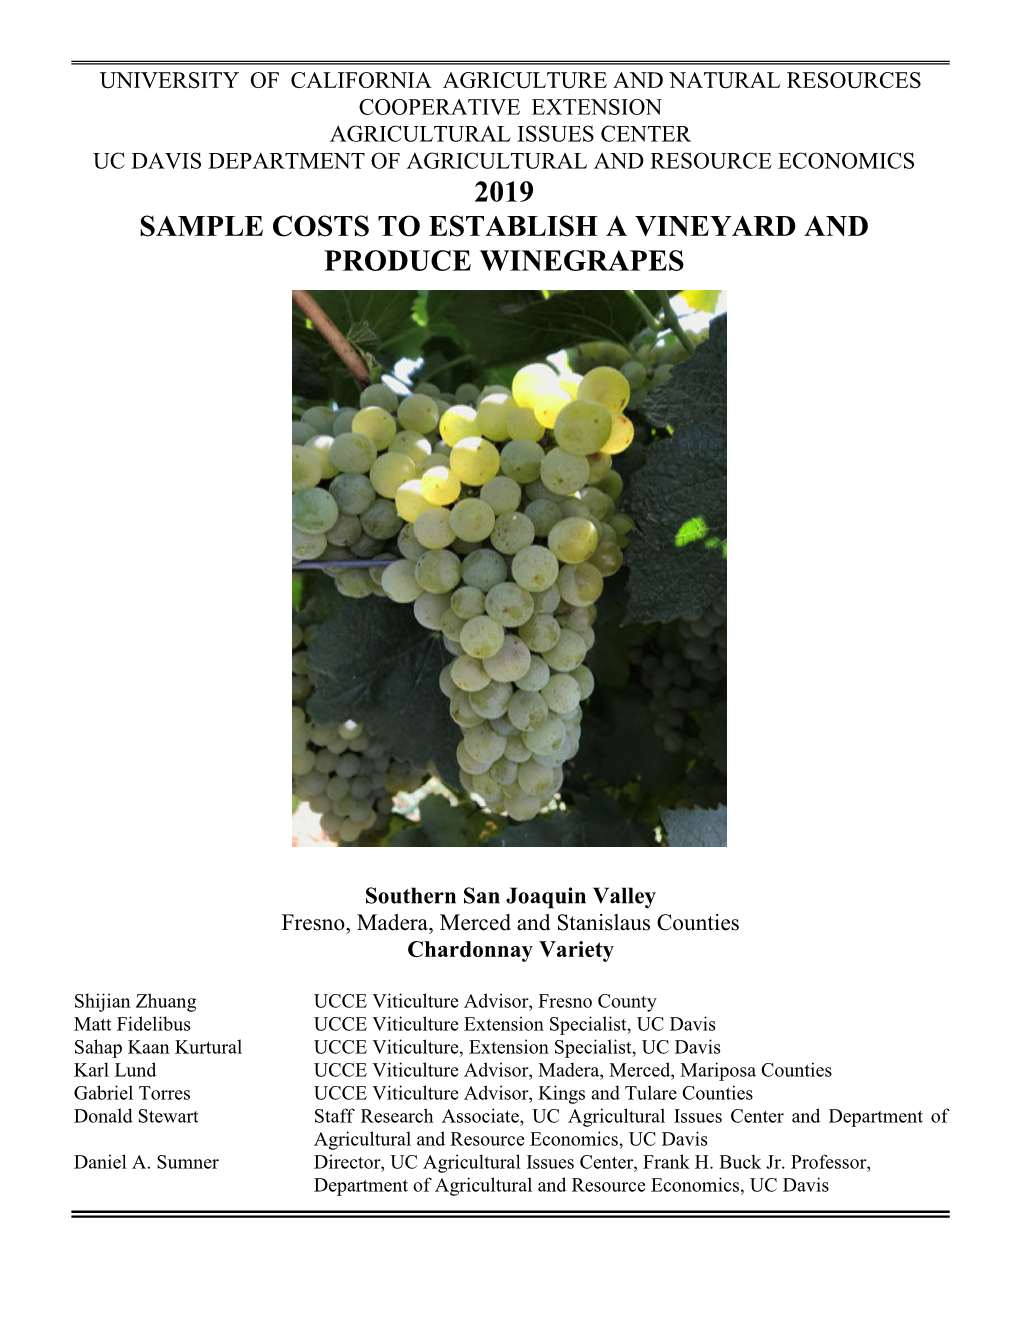 Sample Costs to Establish a Vineyard and Produce Winegrapes